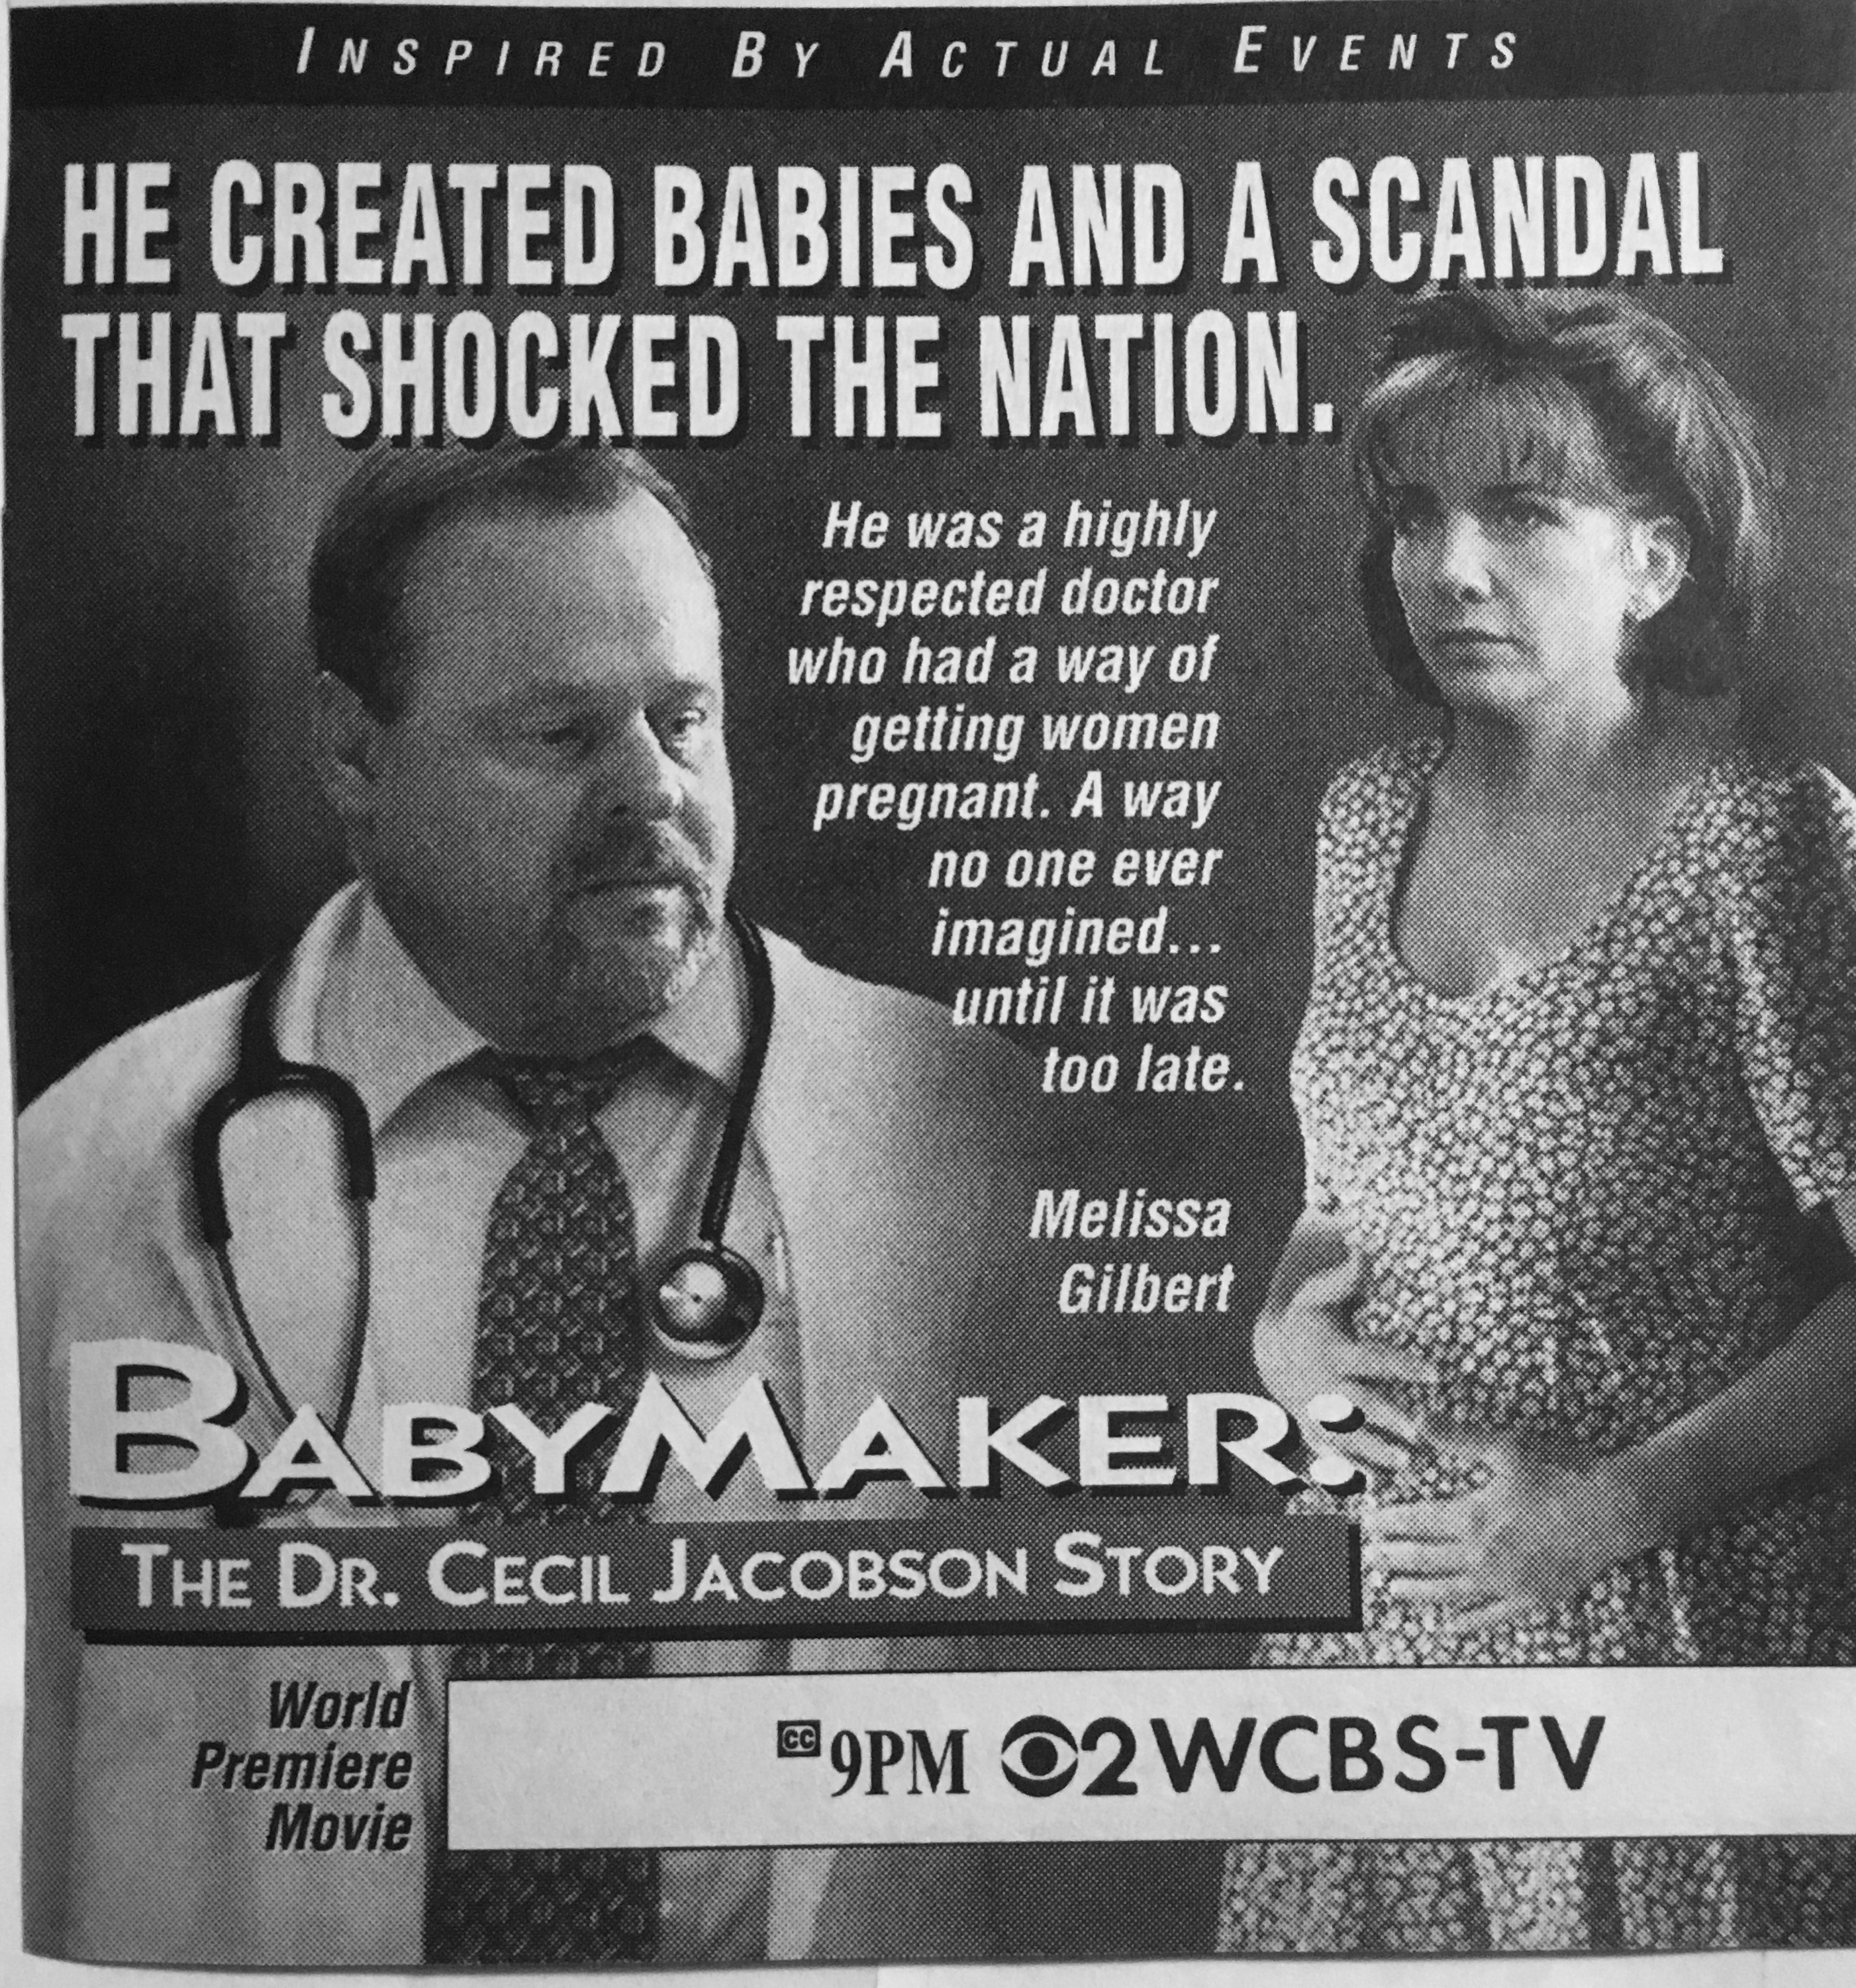 The Babymaker: The Dr. Cecil Jacobson Story (1994) Screenshot 2 